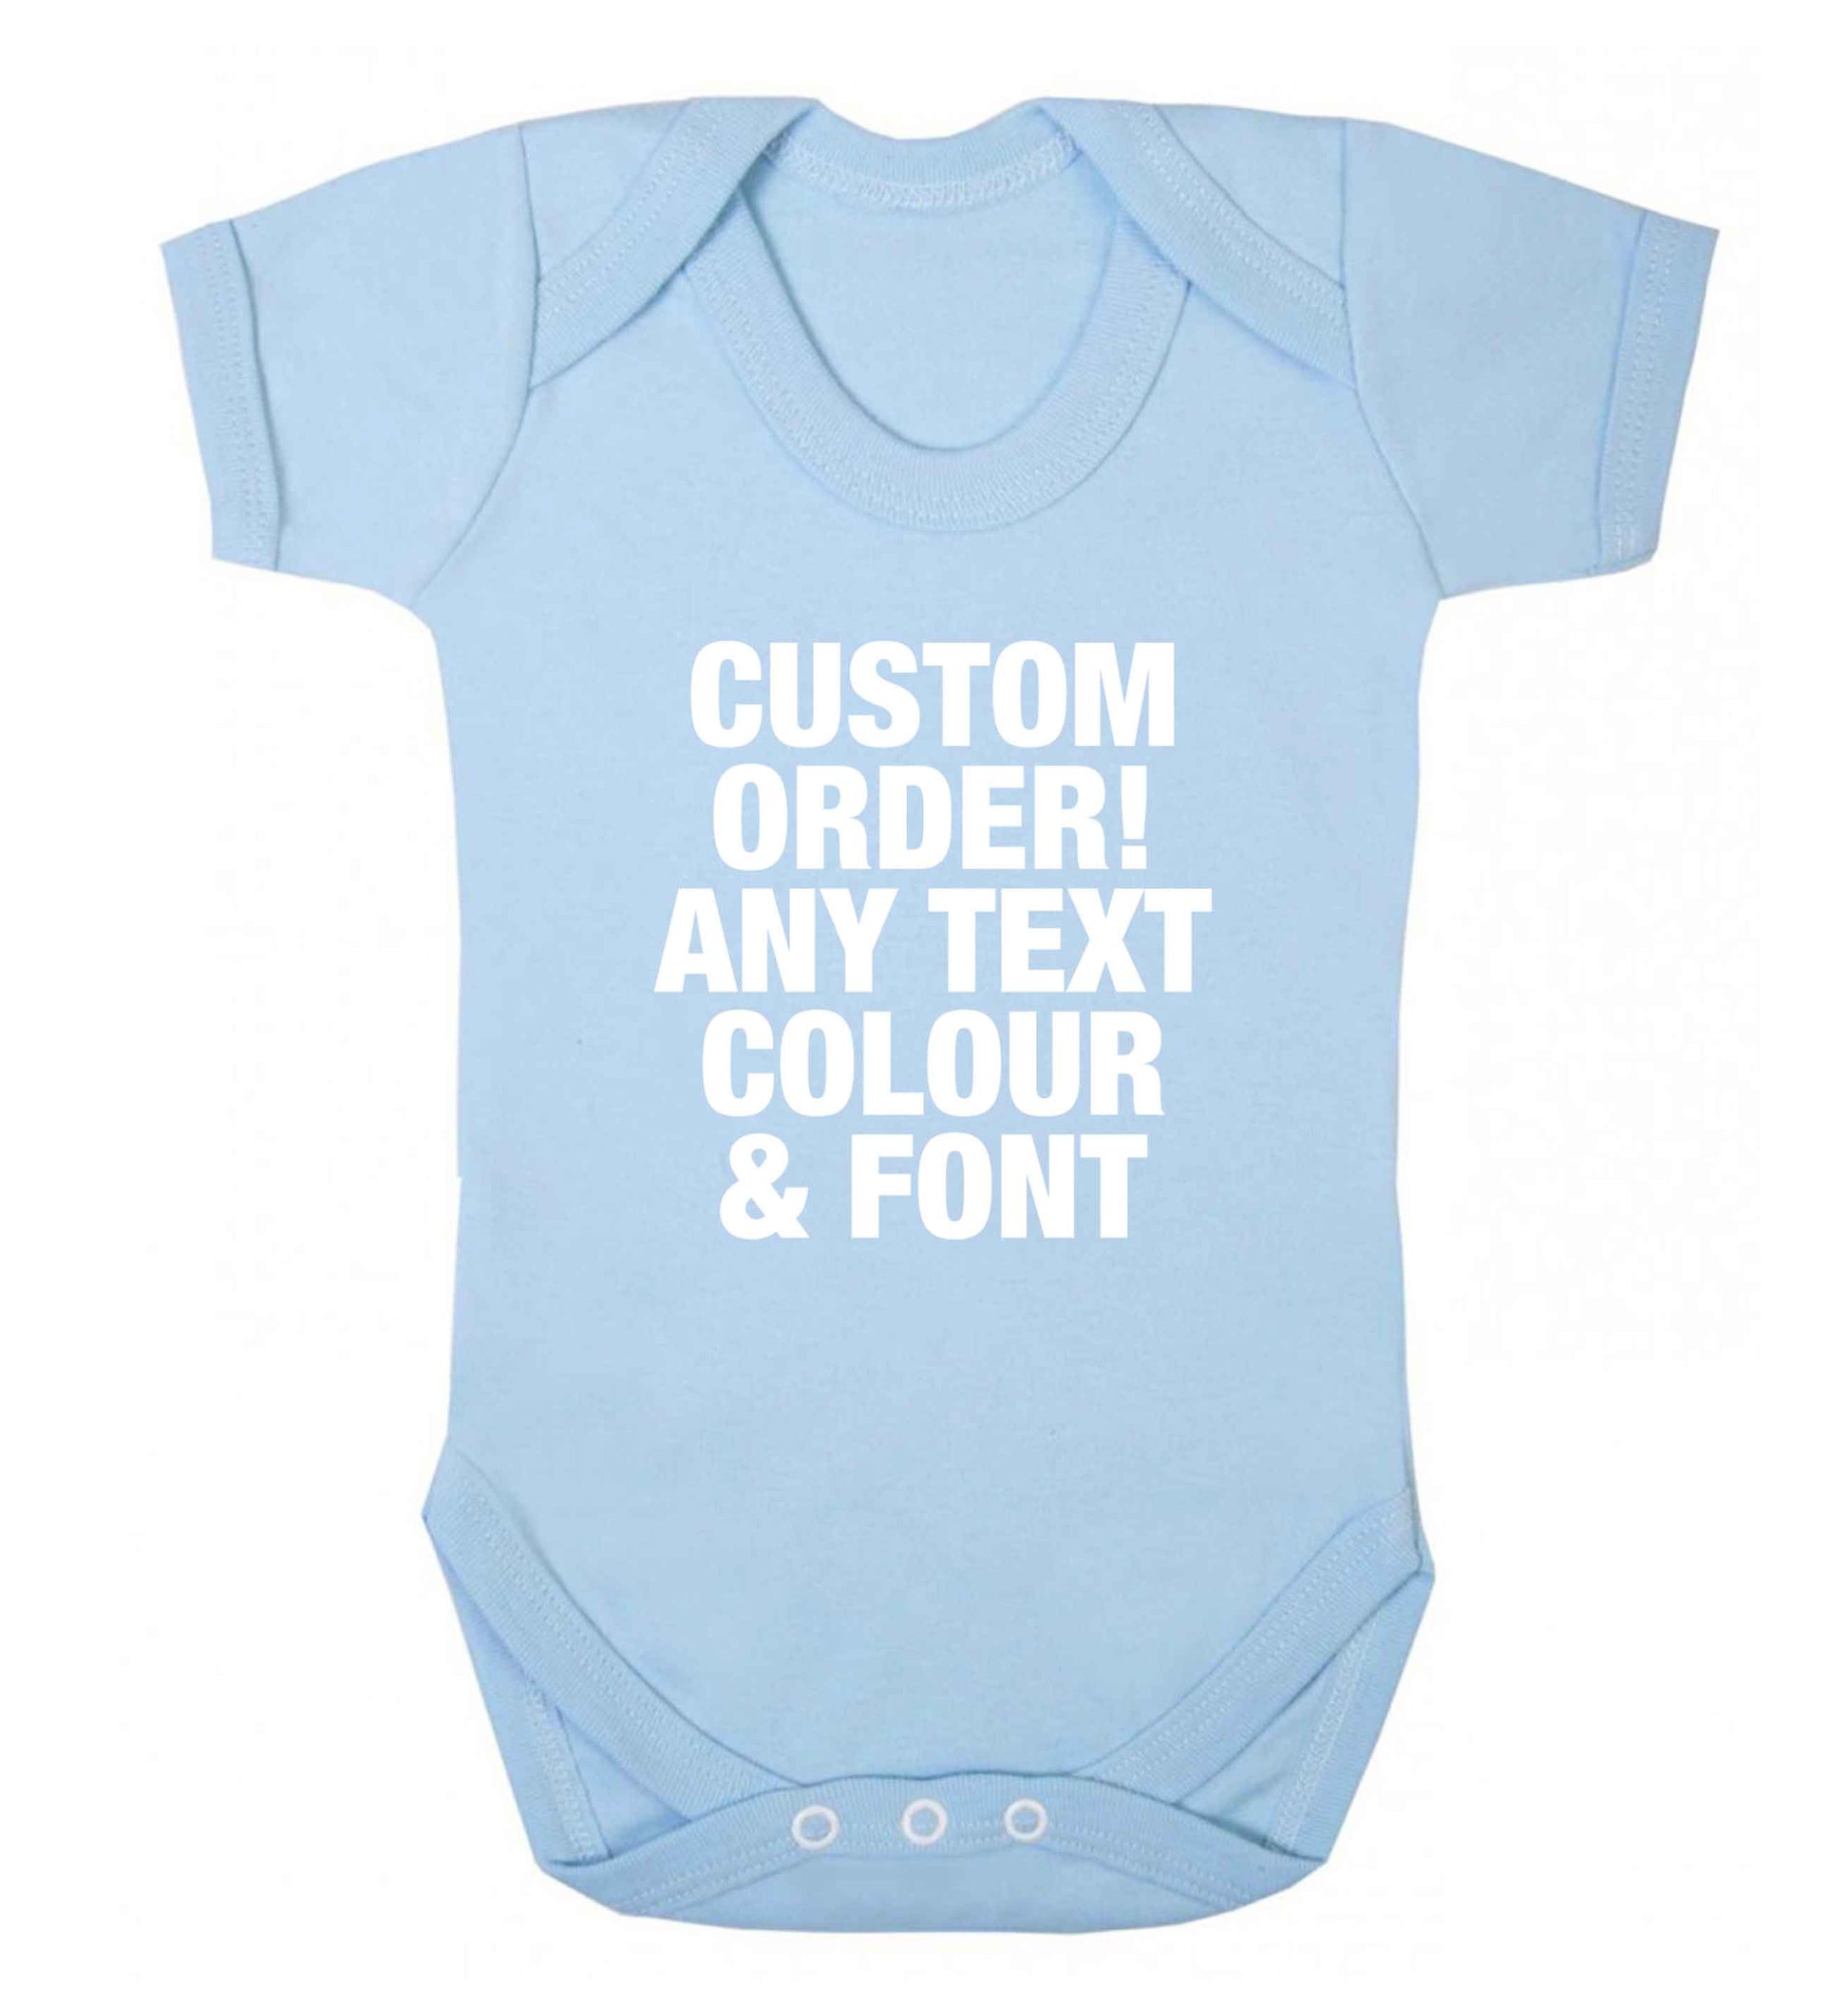 Custom order any text colour and font baby vest pale blue 18-24 months